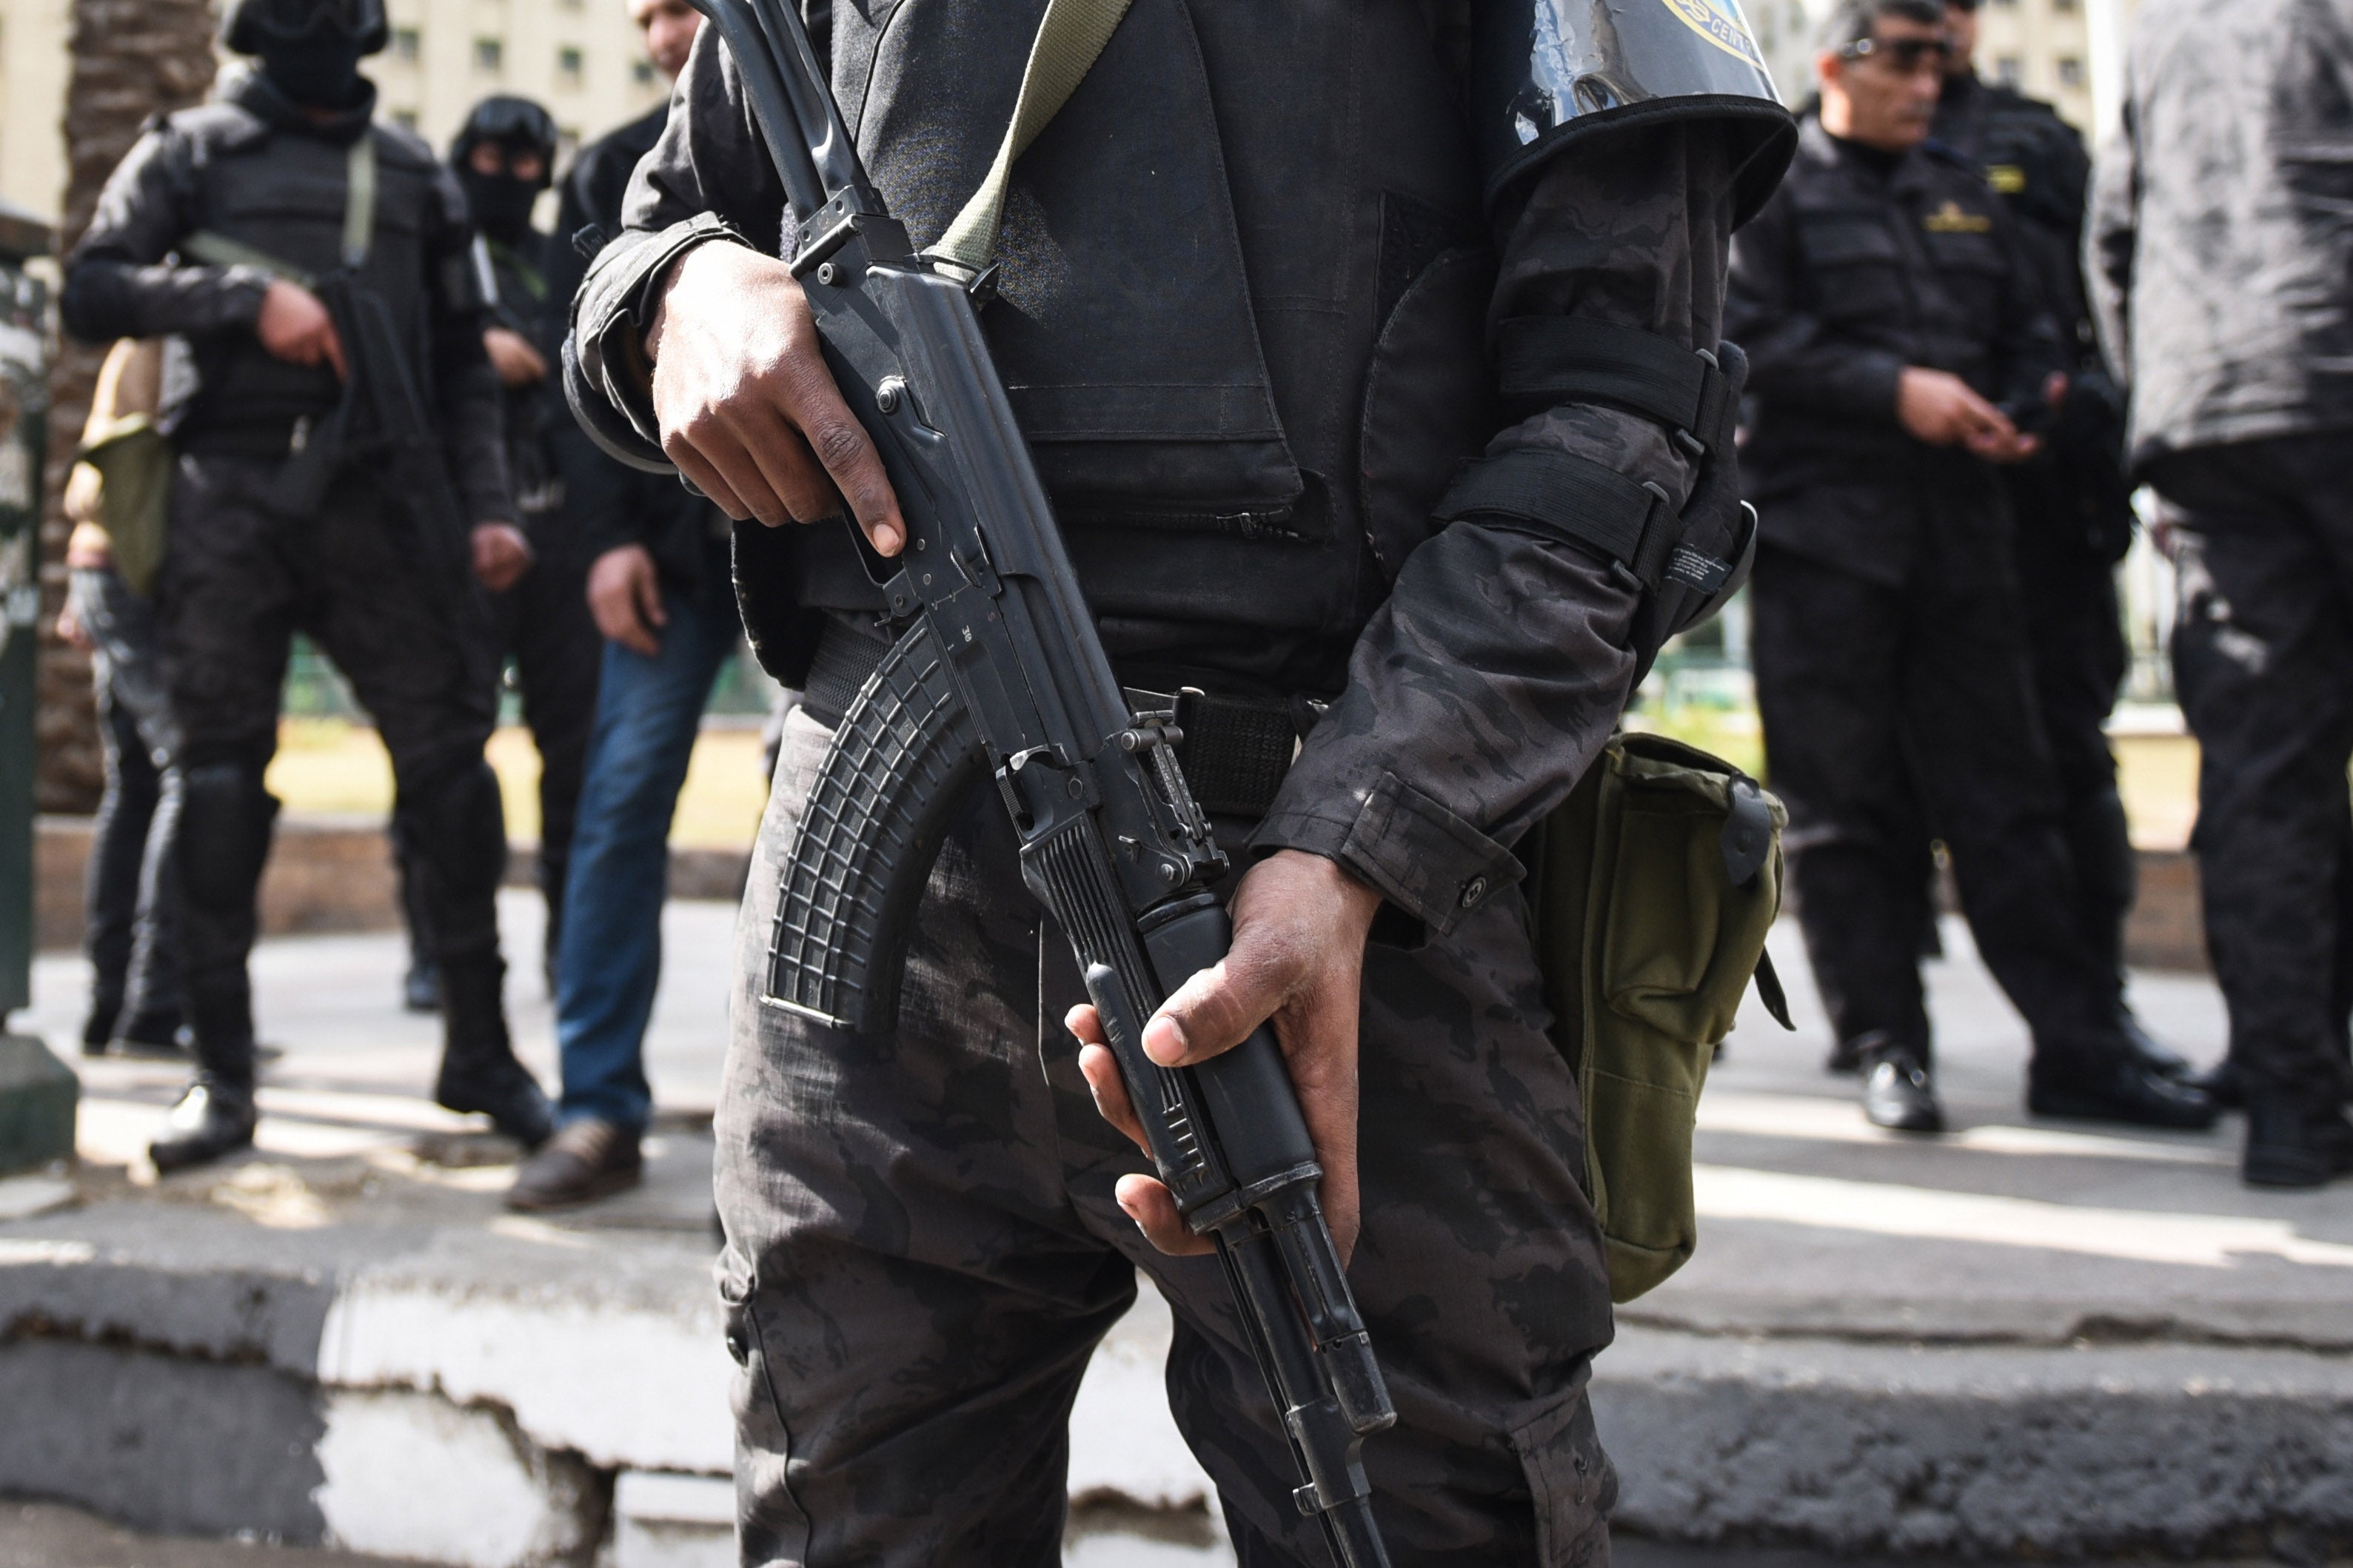 A security officer holding a weapon